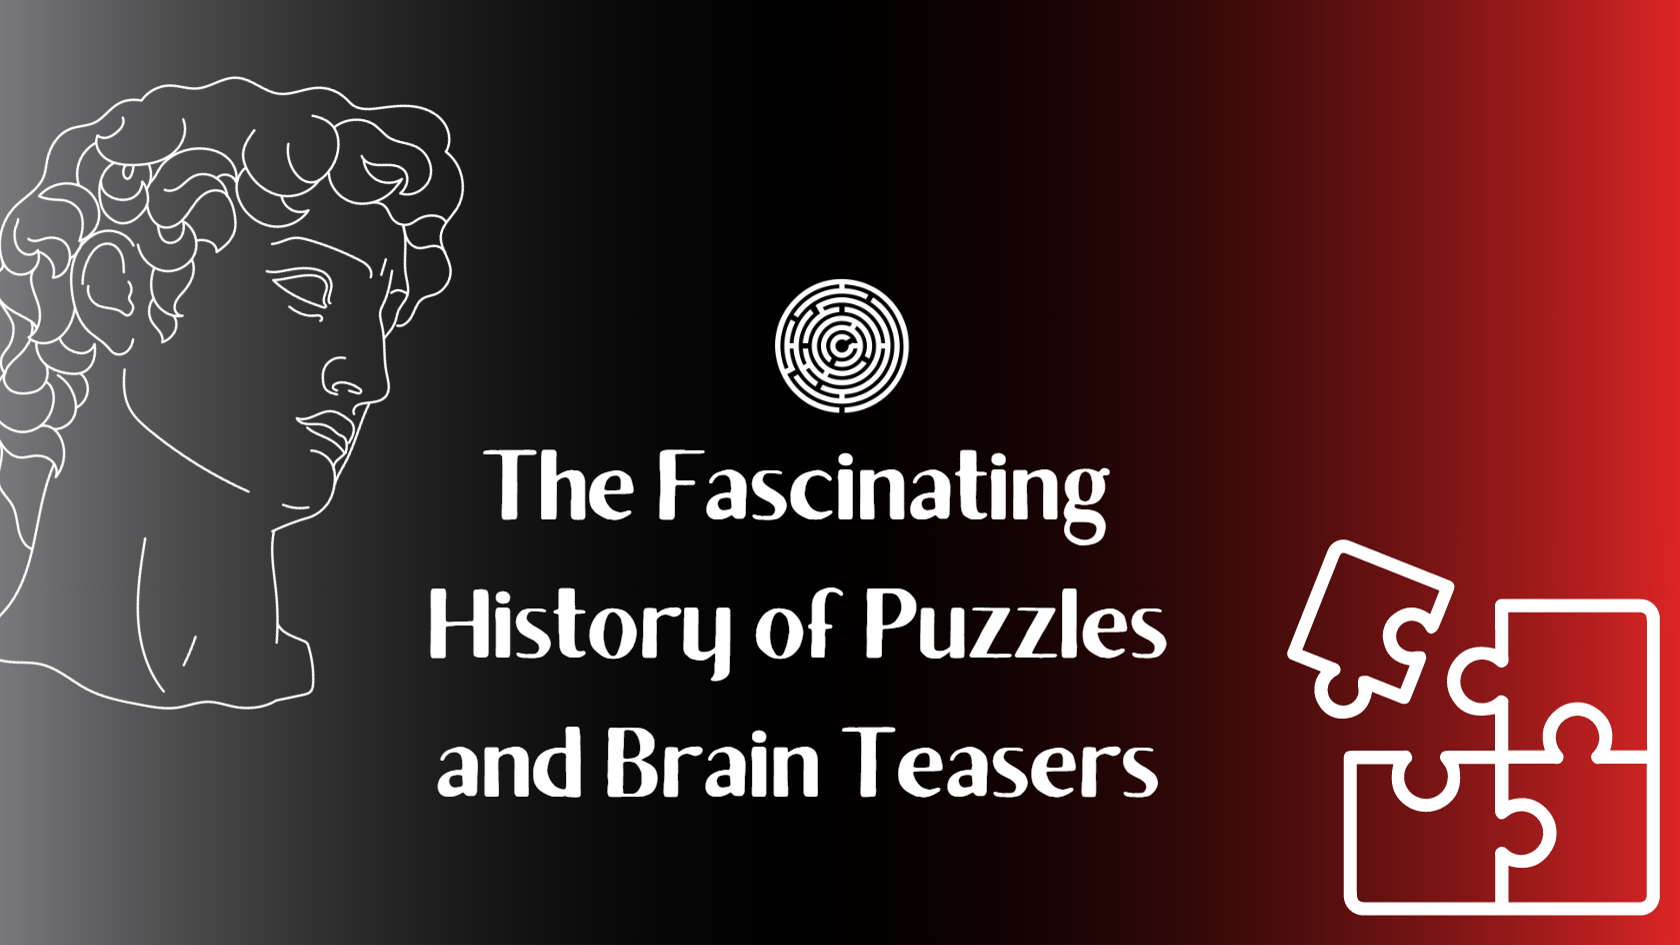 The Fascinating History of Puzzles and Brain Teasers